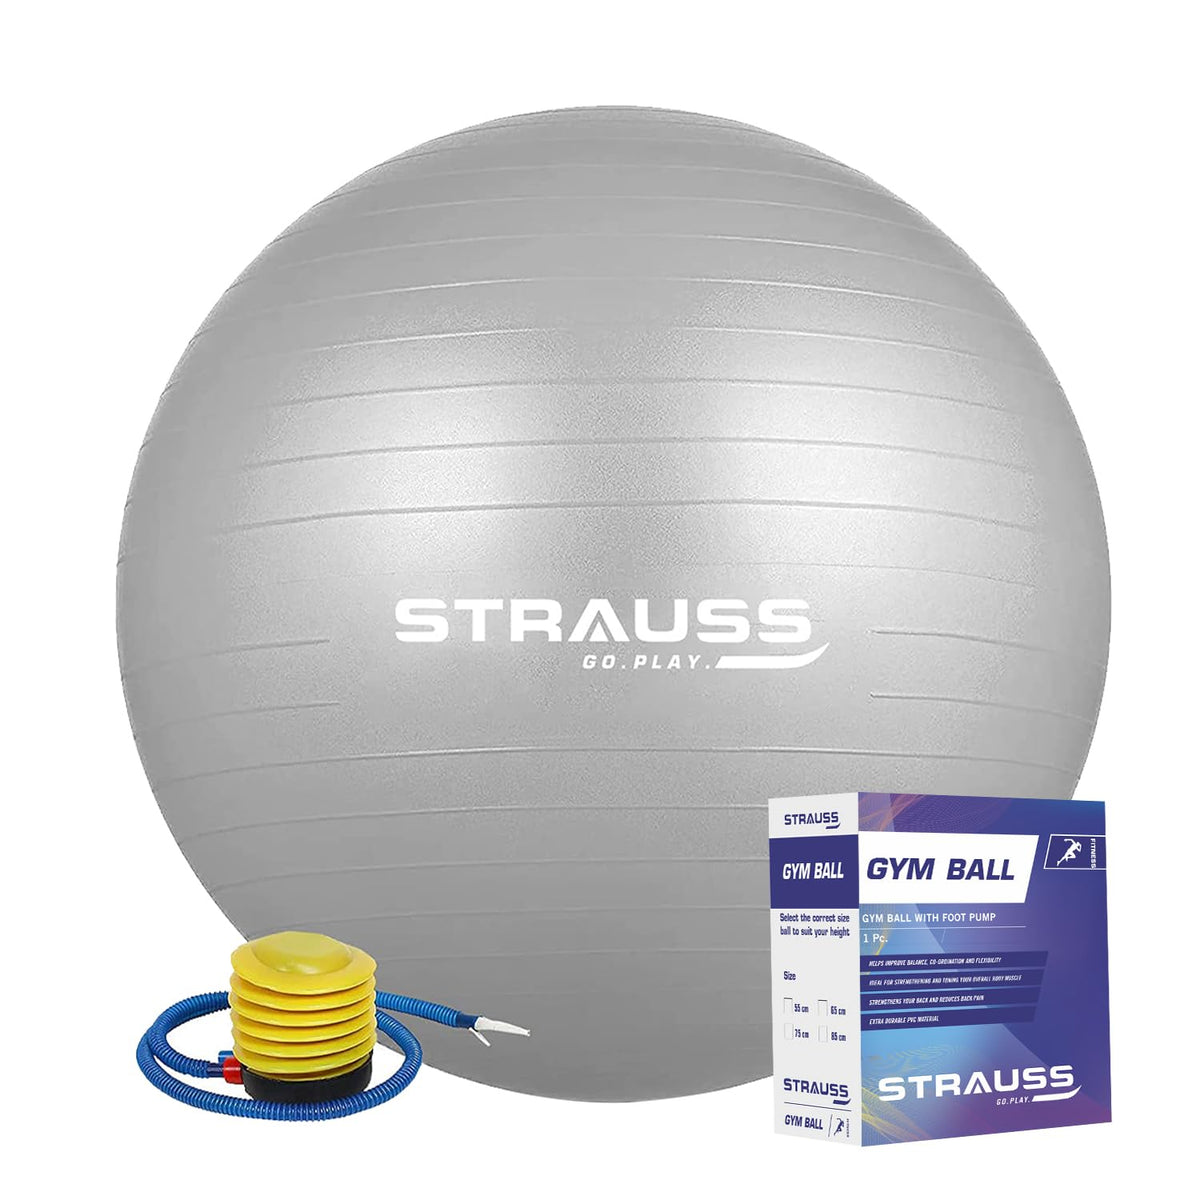 STRAUSS Anti-Burst Rubber Gym Ball with Free Foot Pump | Round Shape Swiss Ball for Exercise, Workout, Yoga, Pregnancy, Birthing, Balance & Stability, 65 cm, (Grey)